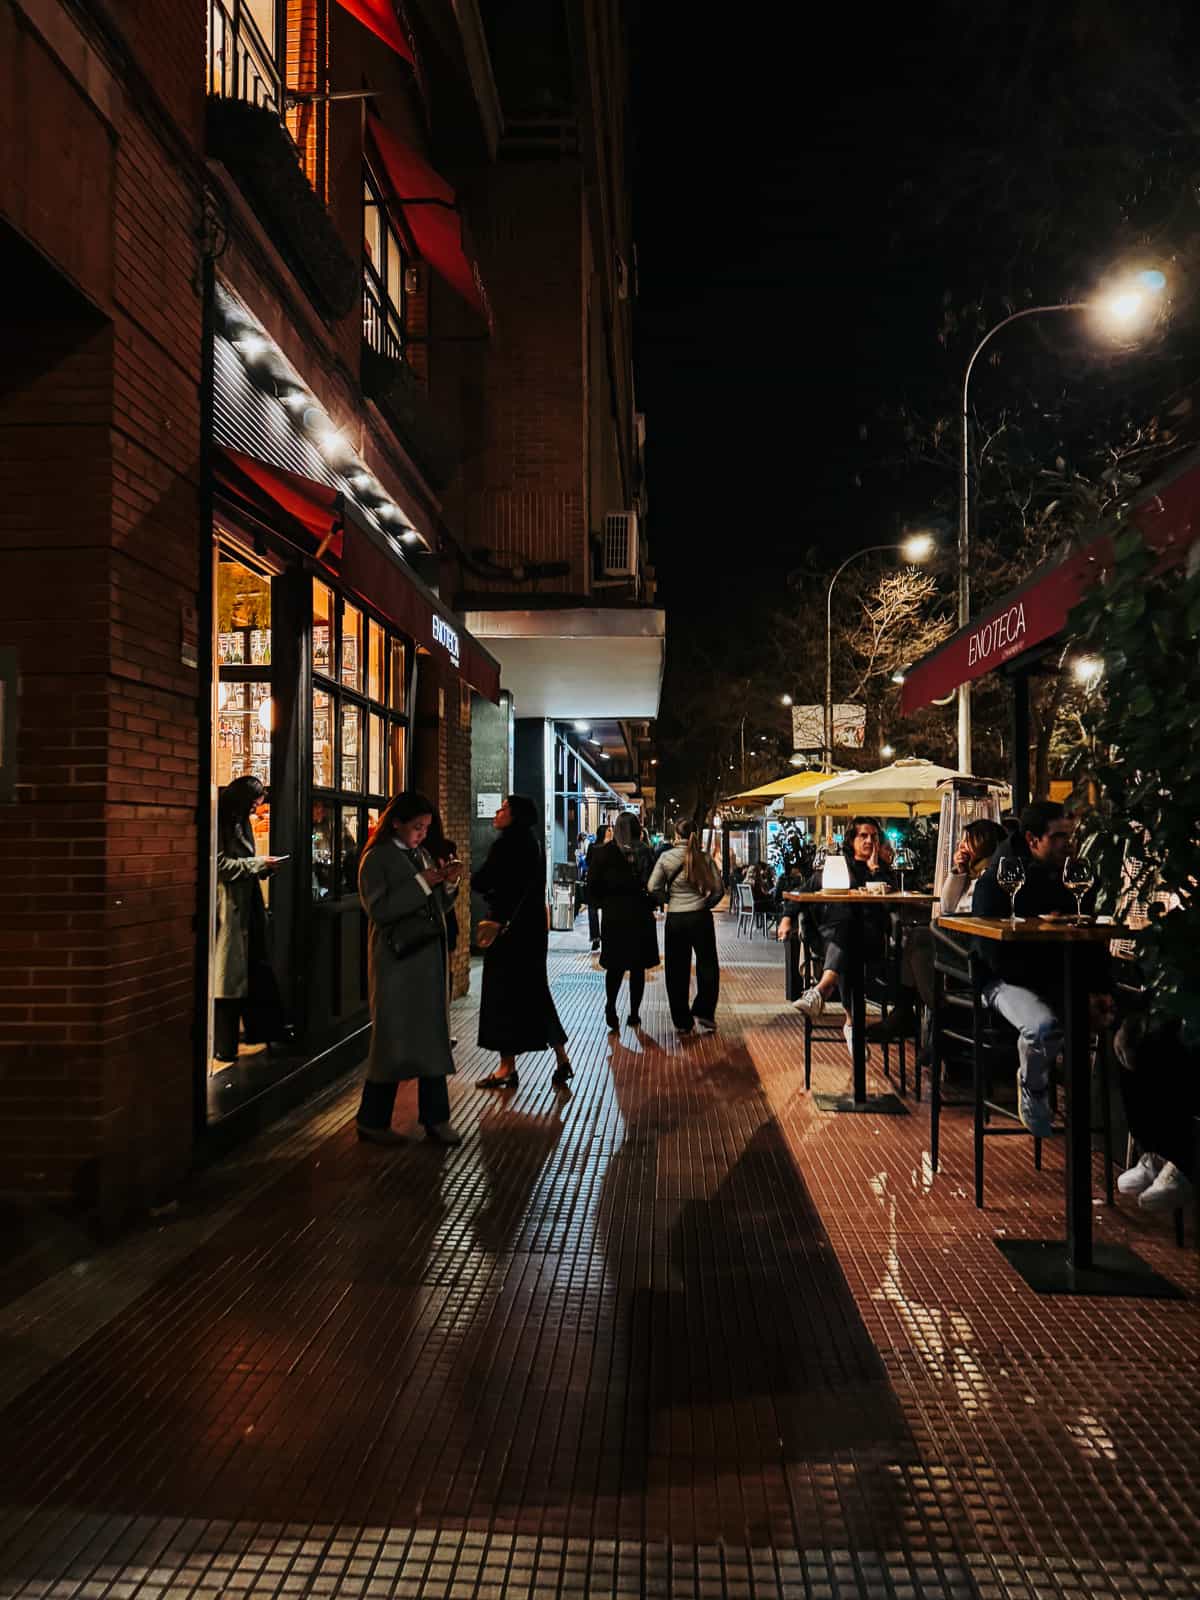 Evening view of a lively street scene outside a row of restaurants and bars, with people walking and dining alfresco, illuminated by street lamps and warm indoor lighting